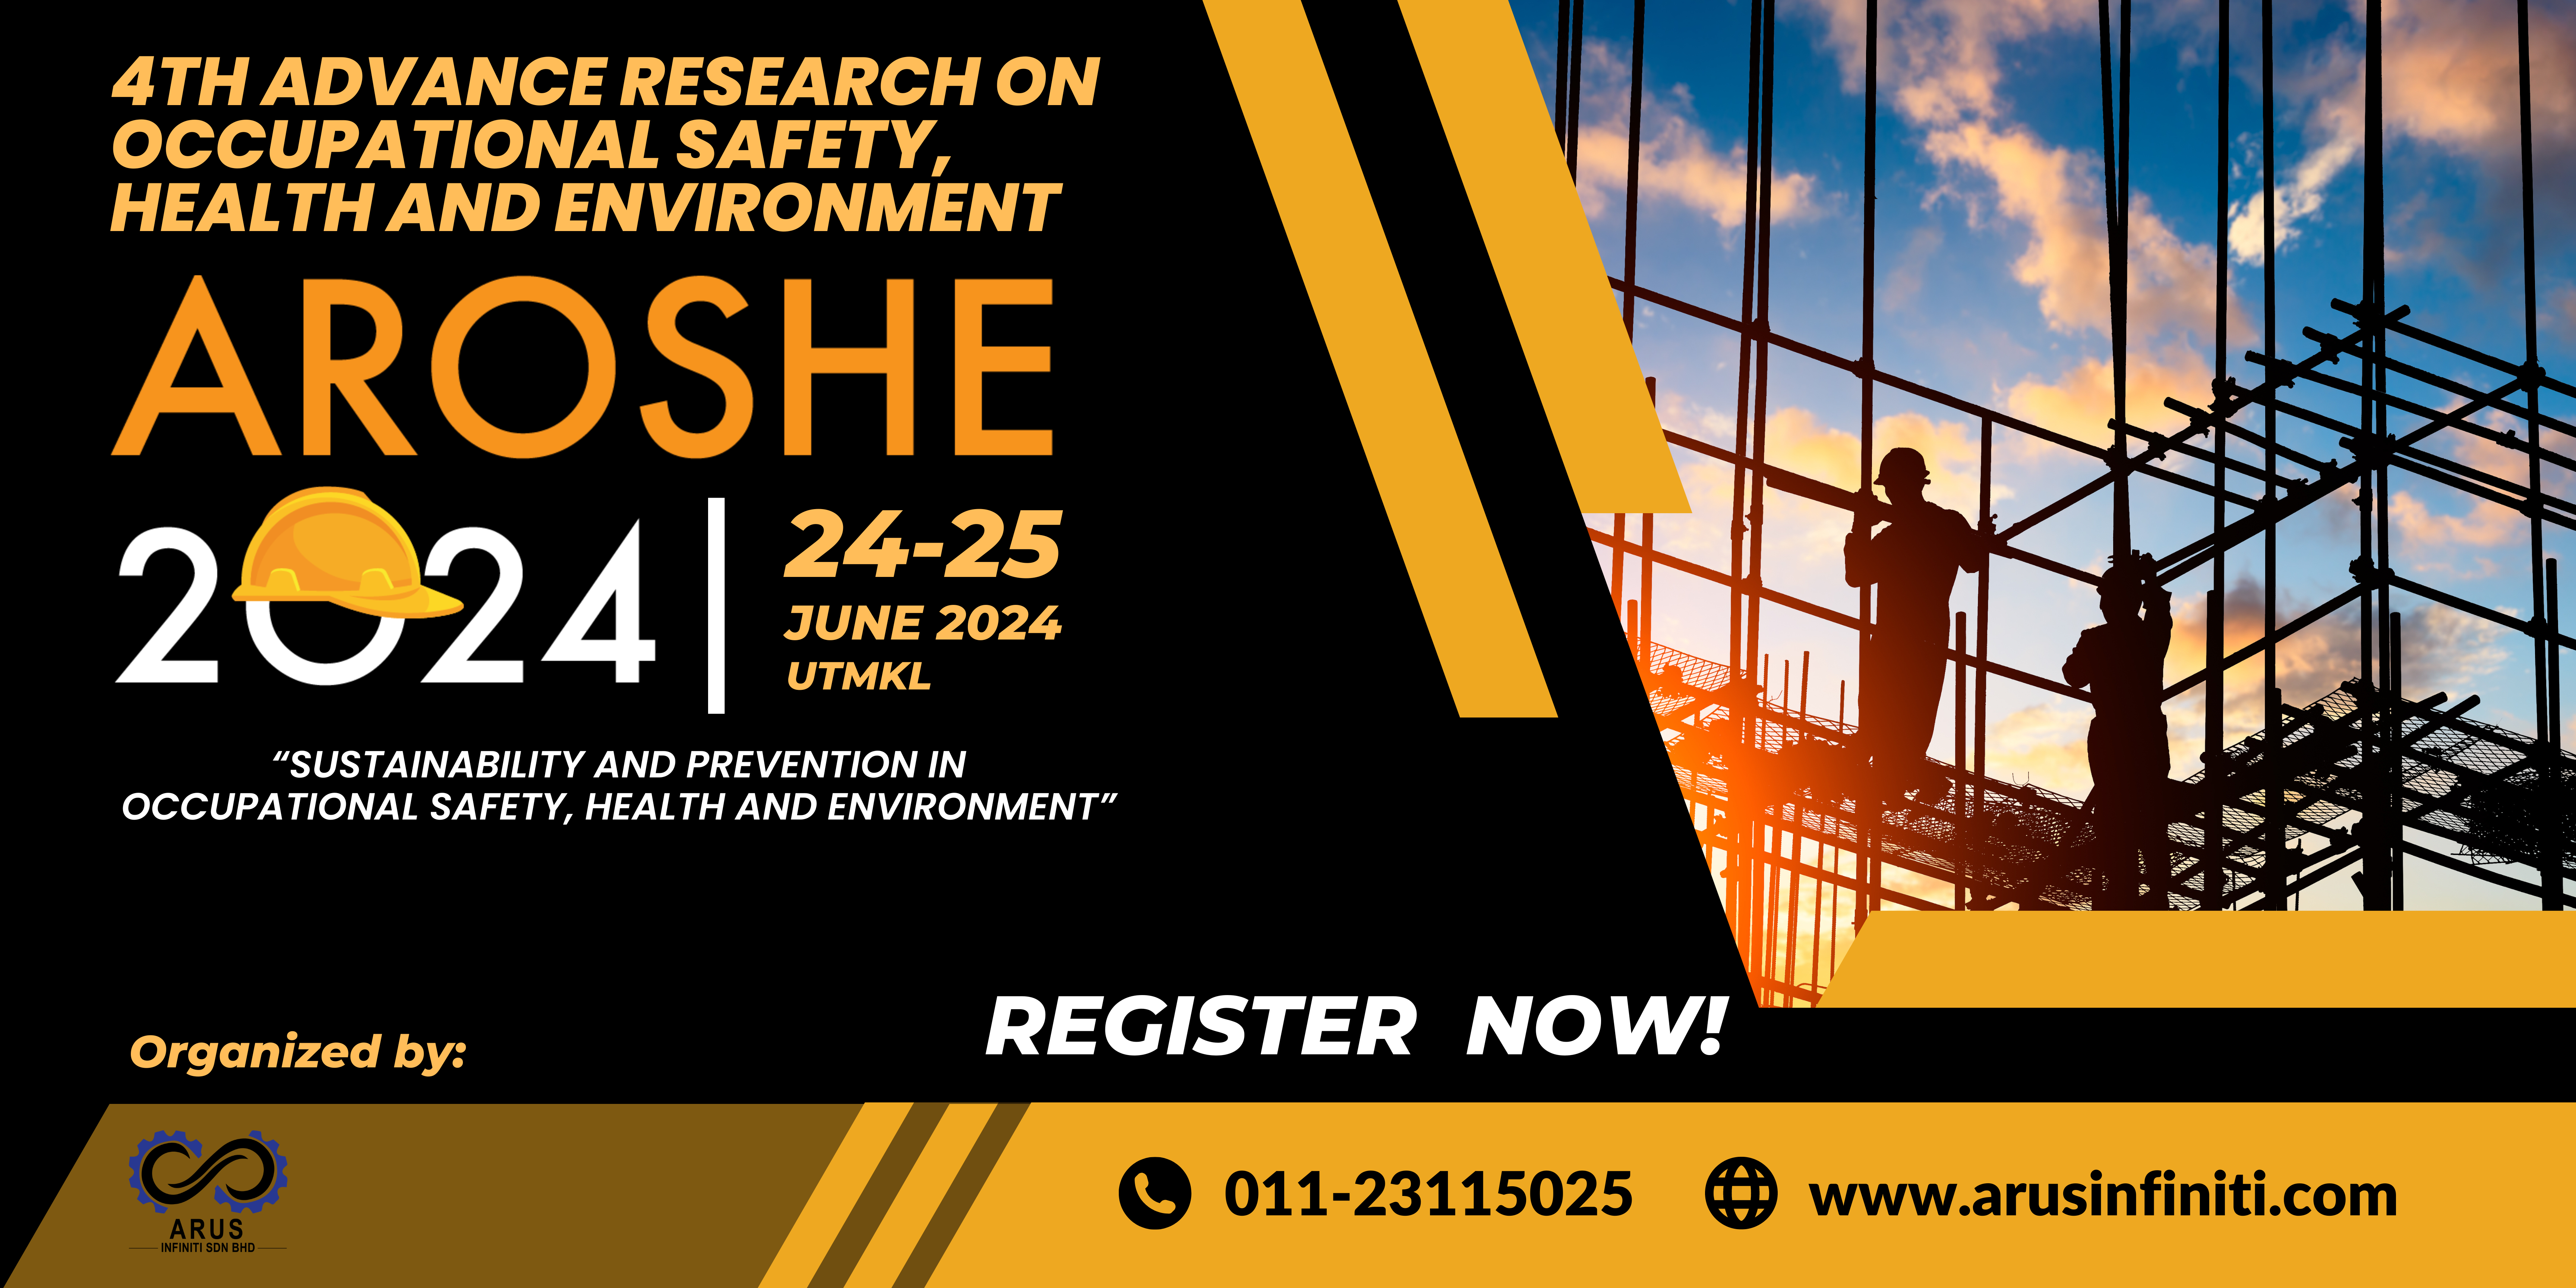 4TH ADVANCE RESEARCH ON OCCUPATIONAL SAFETY, HEALTH AND ENVIRONMENT